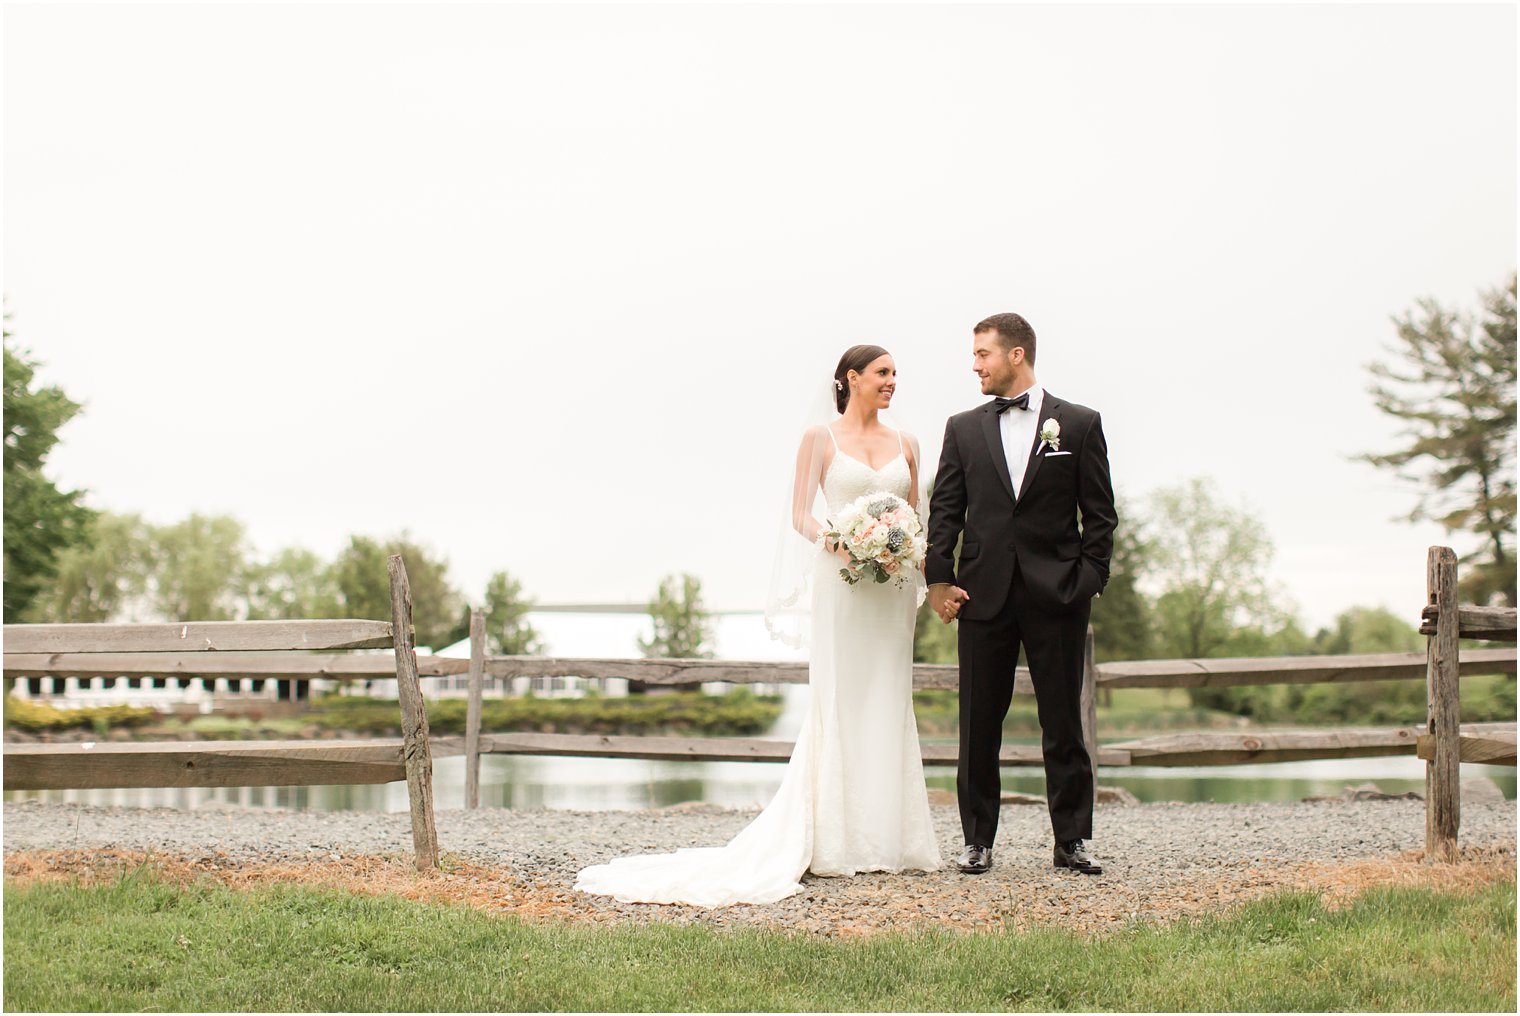 Bride and groom photo at Windows on the Water at Frogbridge | Photos by Idalia Photography